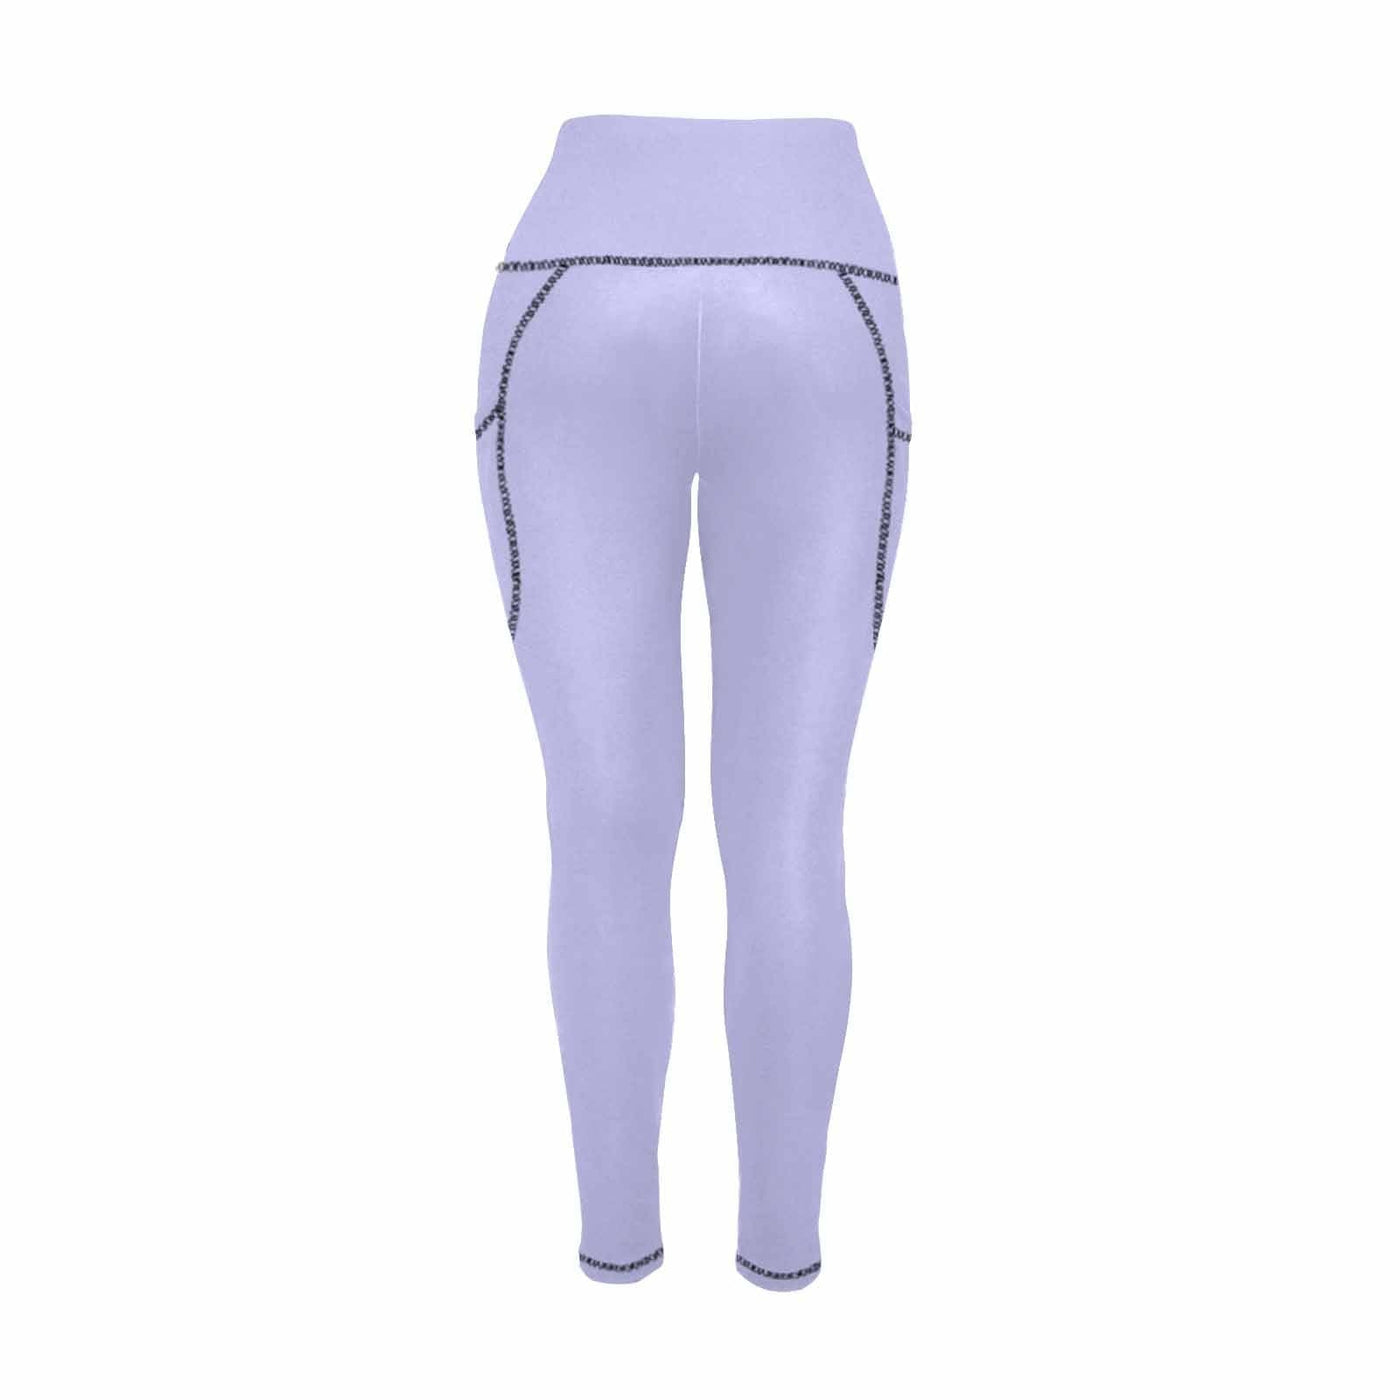 Womens Leggings With Pockets - Fitness Pants / Periwinkle Purple - Womens